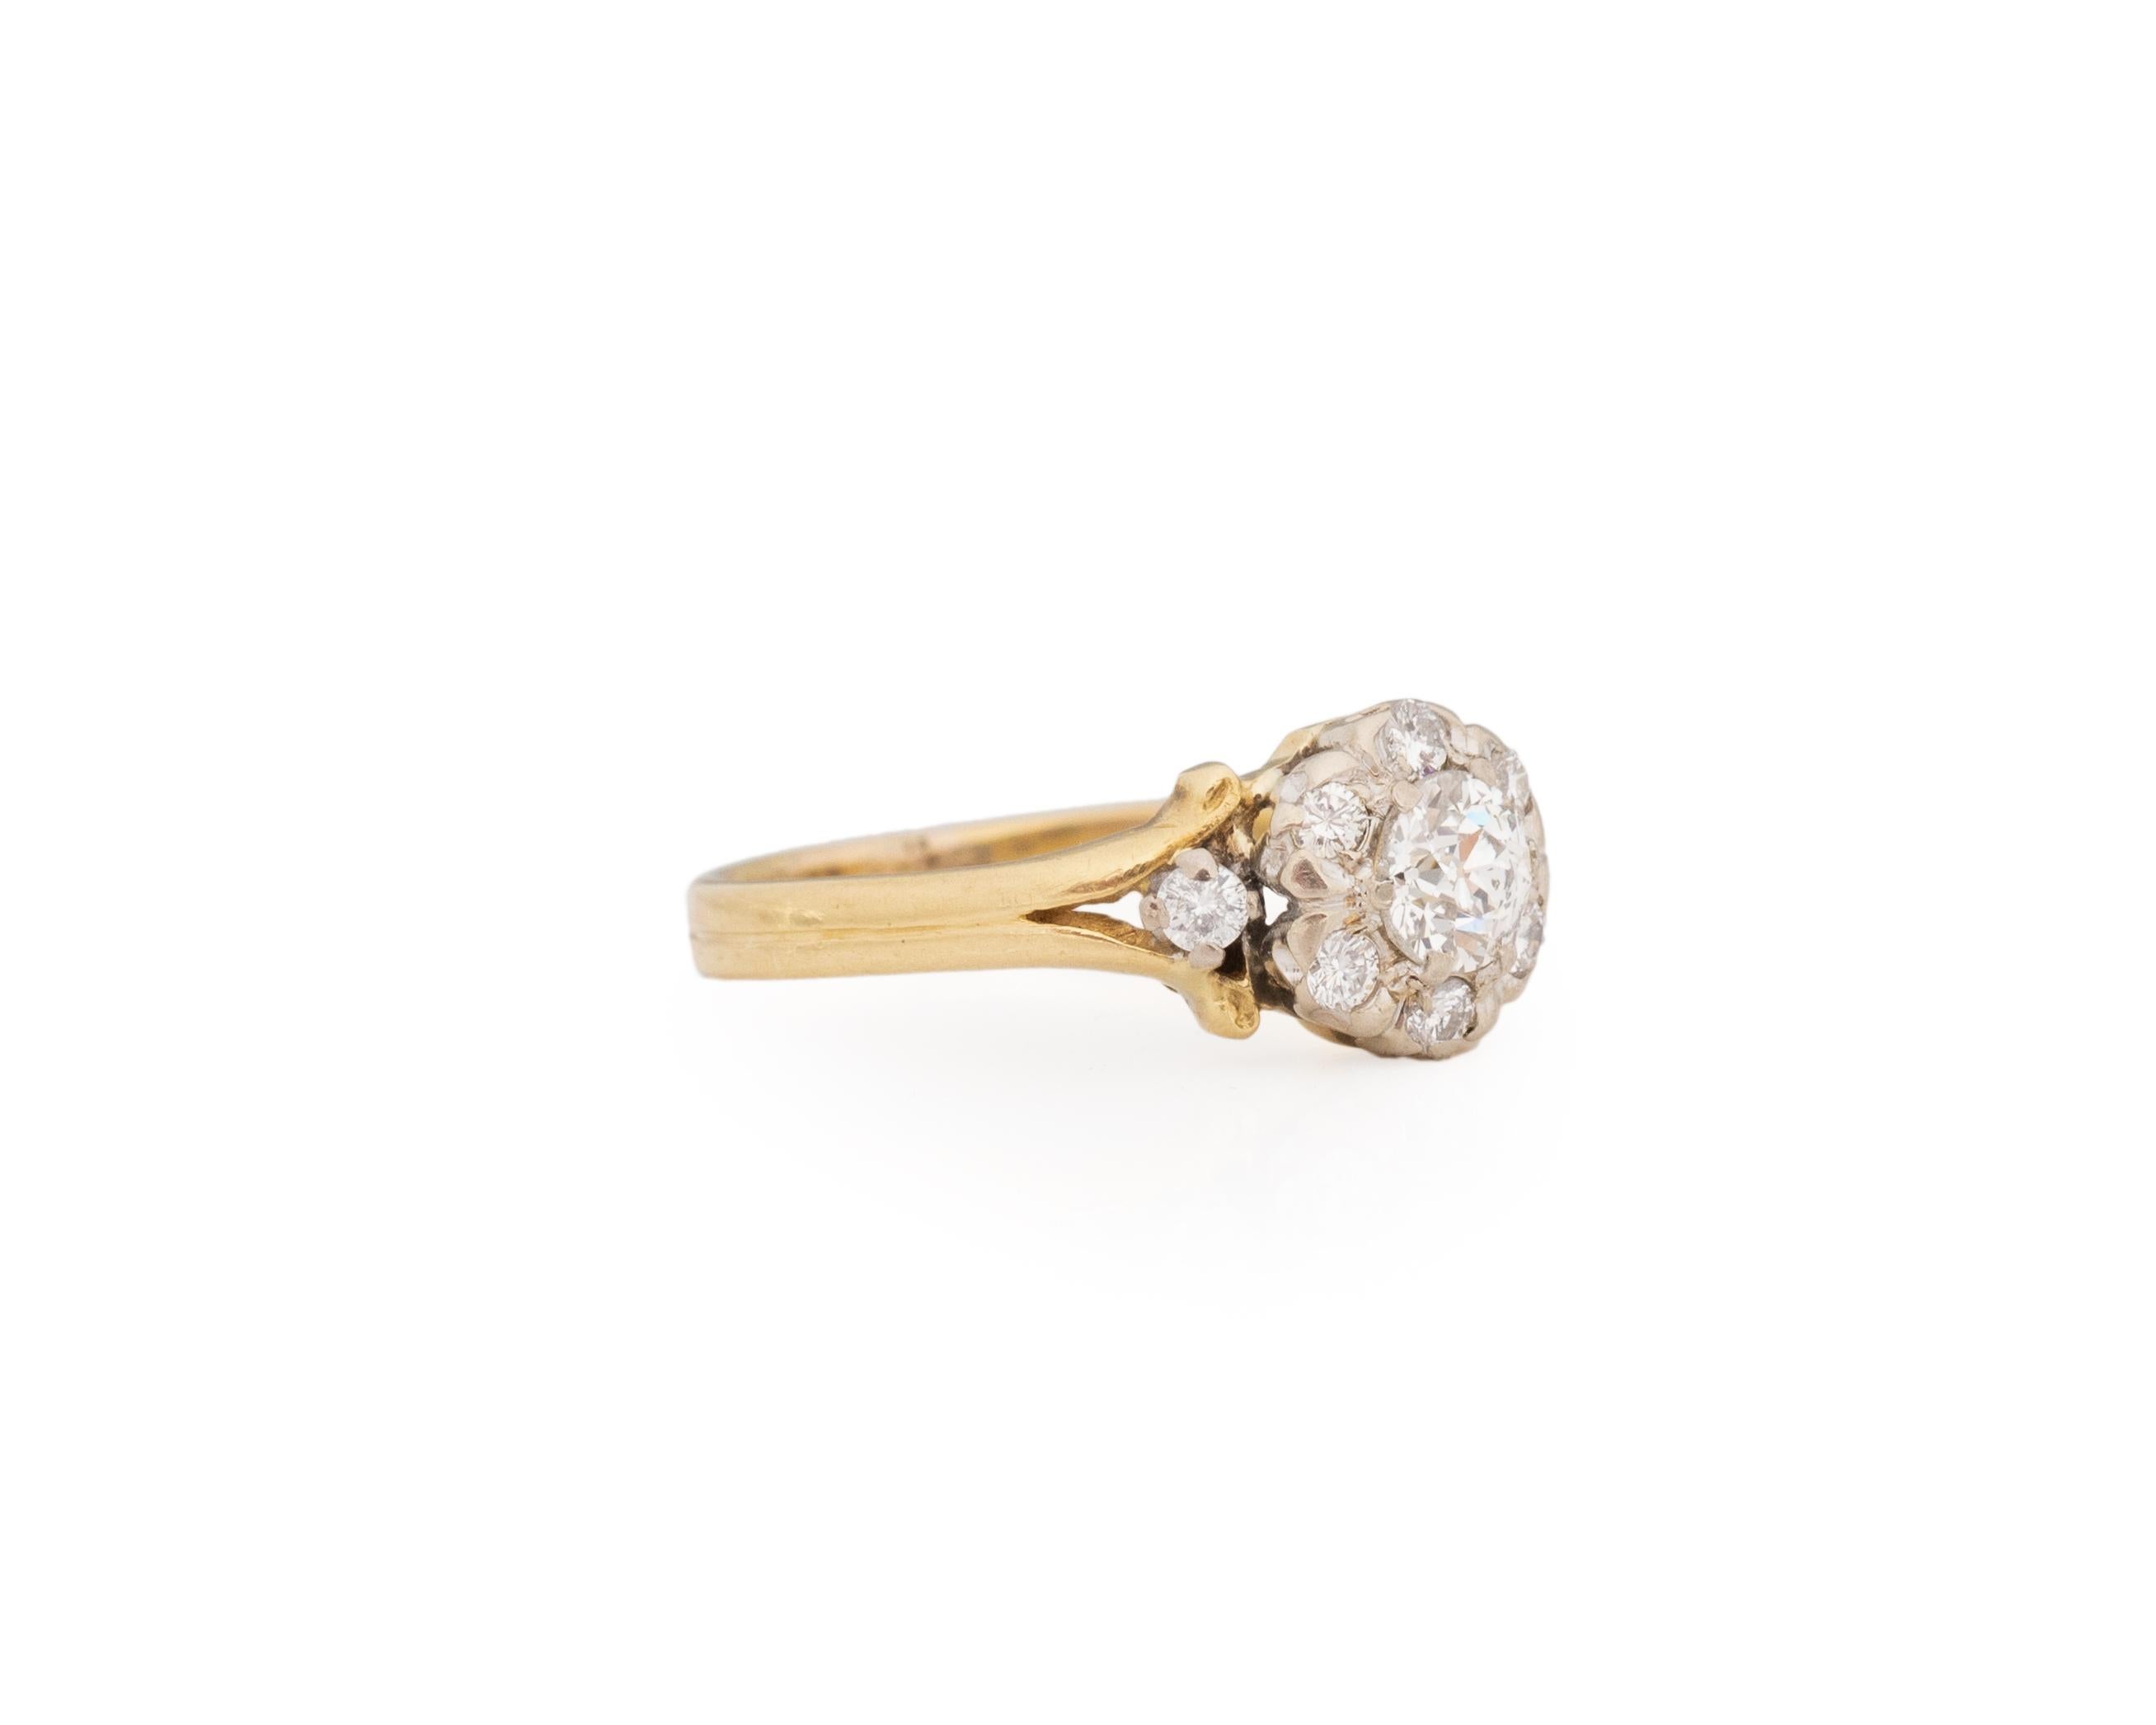 Ring Size: 6.5
Metal Type: 18K Yellow Gold, Platinum prongs [Hallmarked, and Tested]
Weight: 3.0 grams

Center Diamond Details:
Weight: .40ct
Cut: Old European brilliant
Color: I
Clarity: VS

Side Diamond Details: .10ct, total weight

Finger to Top